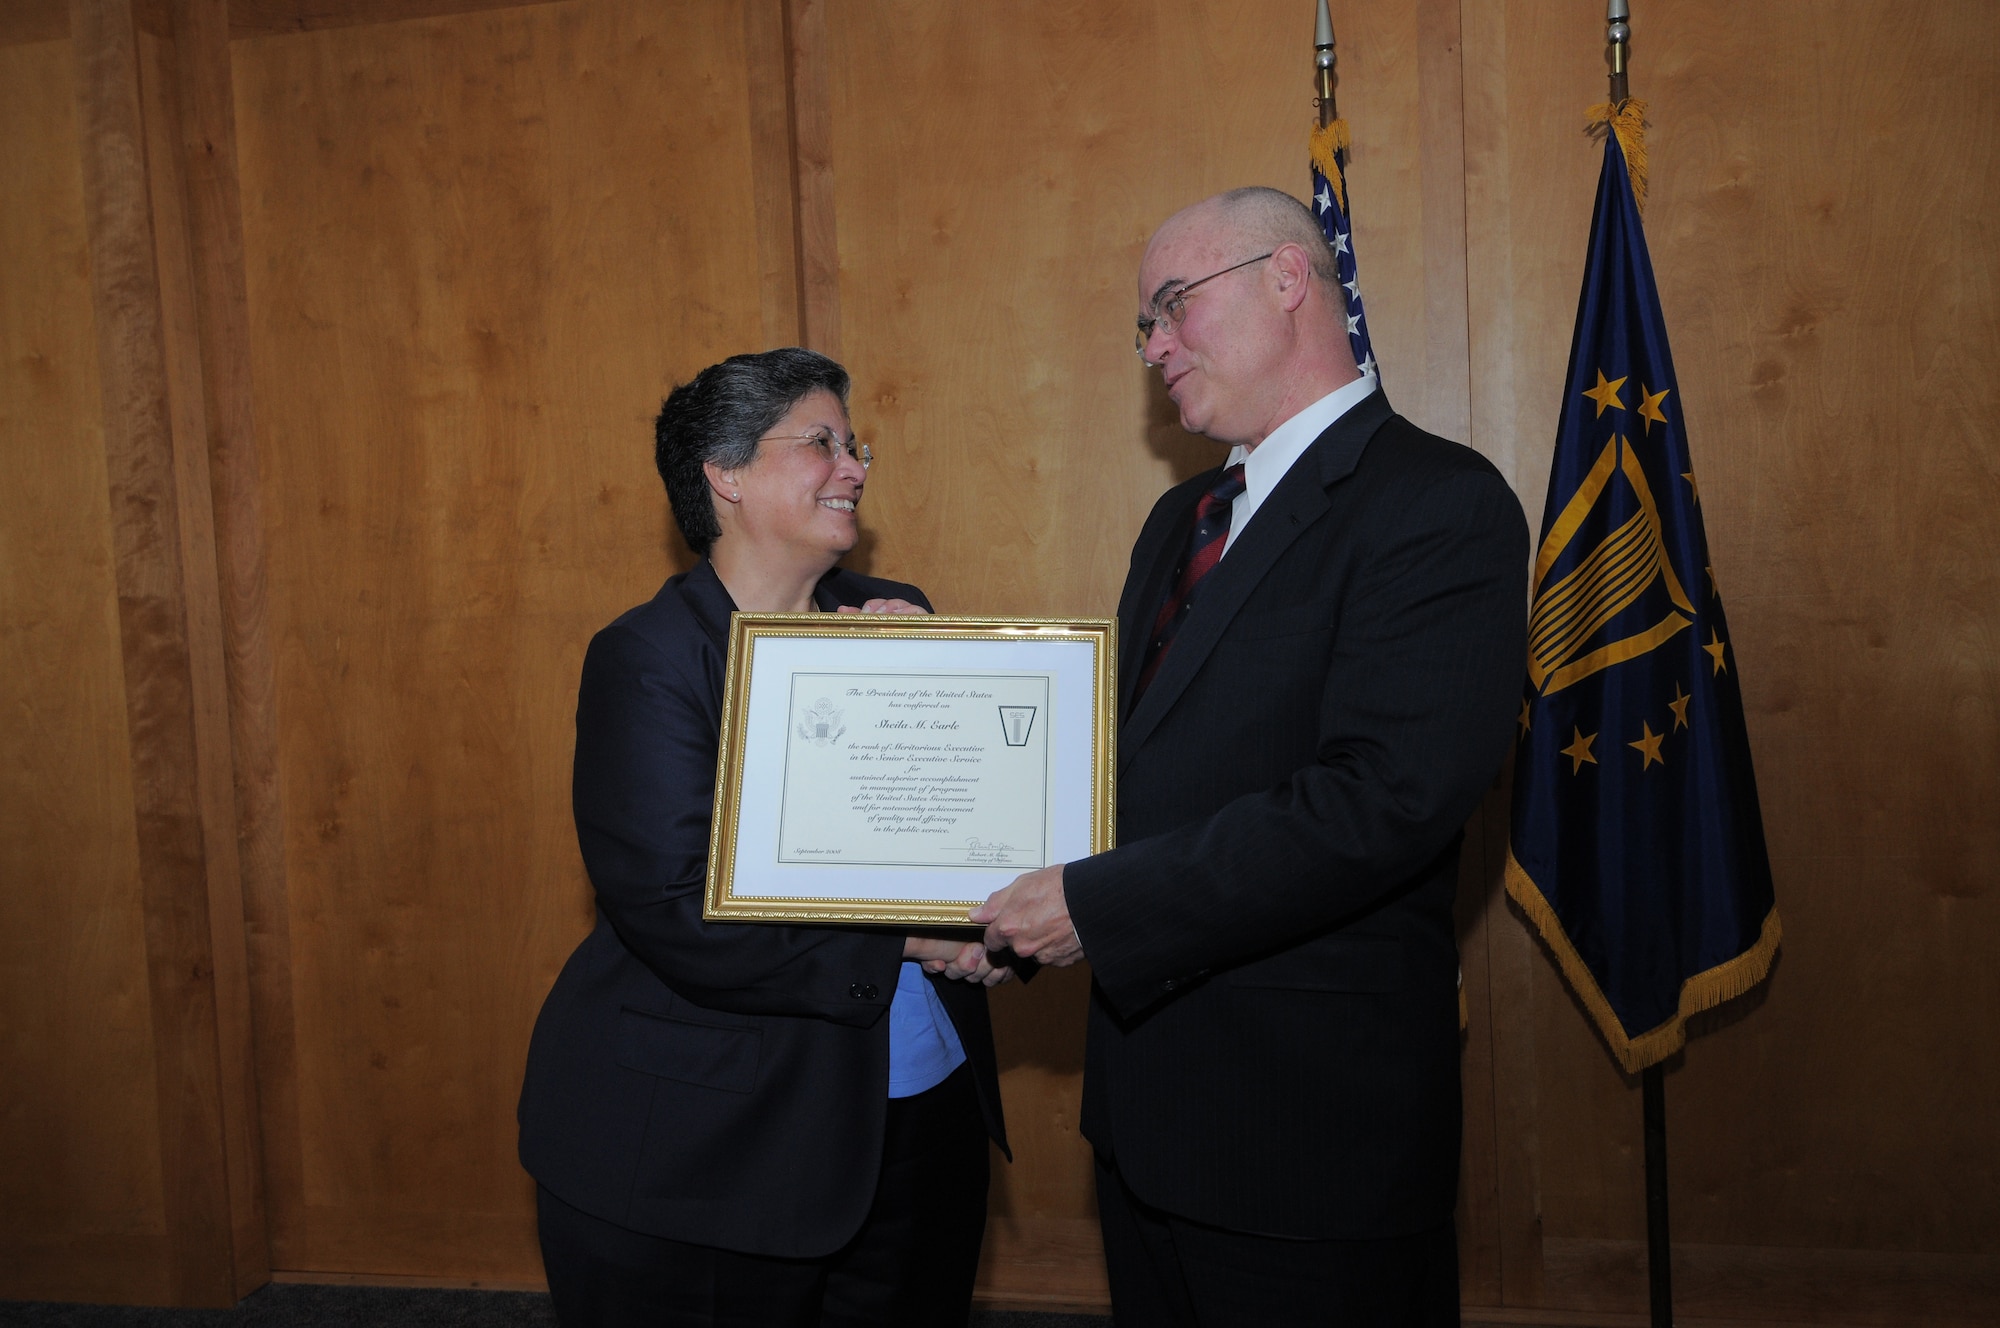 Bill Carr, deputy undersecretary military personnel policy, Office of the Secretary of Defense, presents a Presidential Rank Award to Sheila Earle, Air Force Personnel Center executive director, during a ceremony Dec. 9. Ms. Earle was conferred the rank of "Meritorious Executive in the Senior Executive Service" for her accomplishments in U.S. Government program management and for her quality and efficiency in service to the public. (U.S. Air Force photo by Melissa Peterson)
